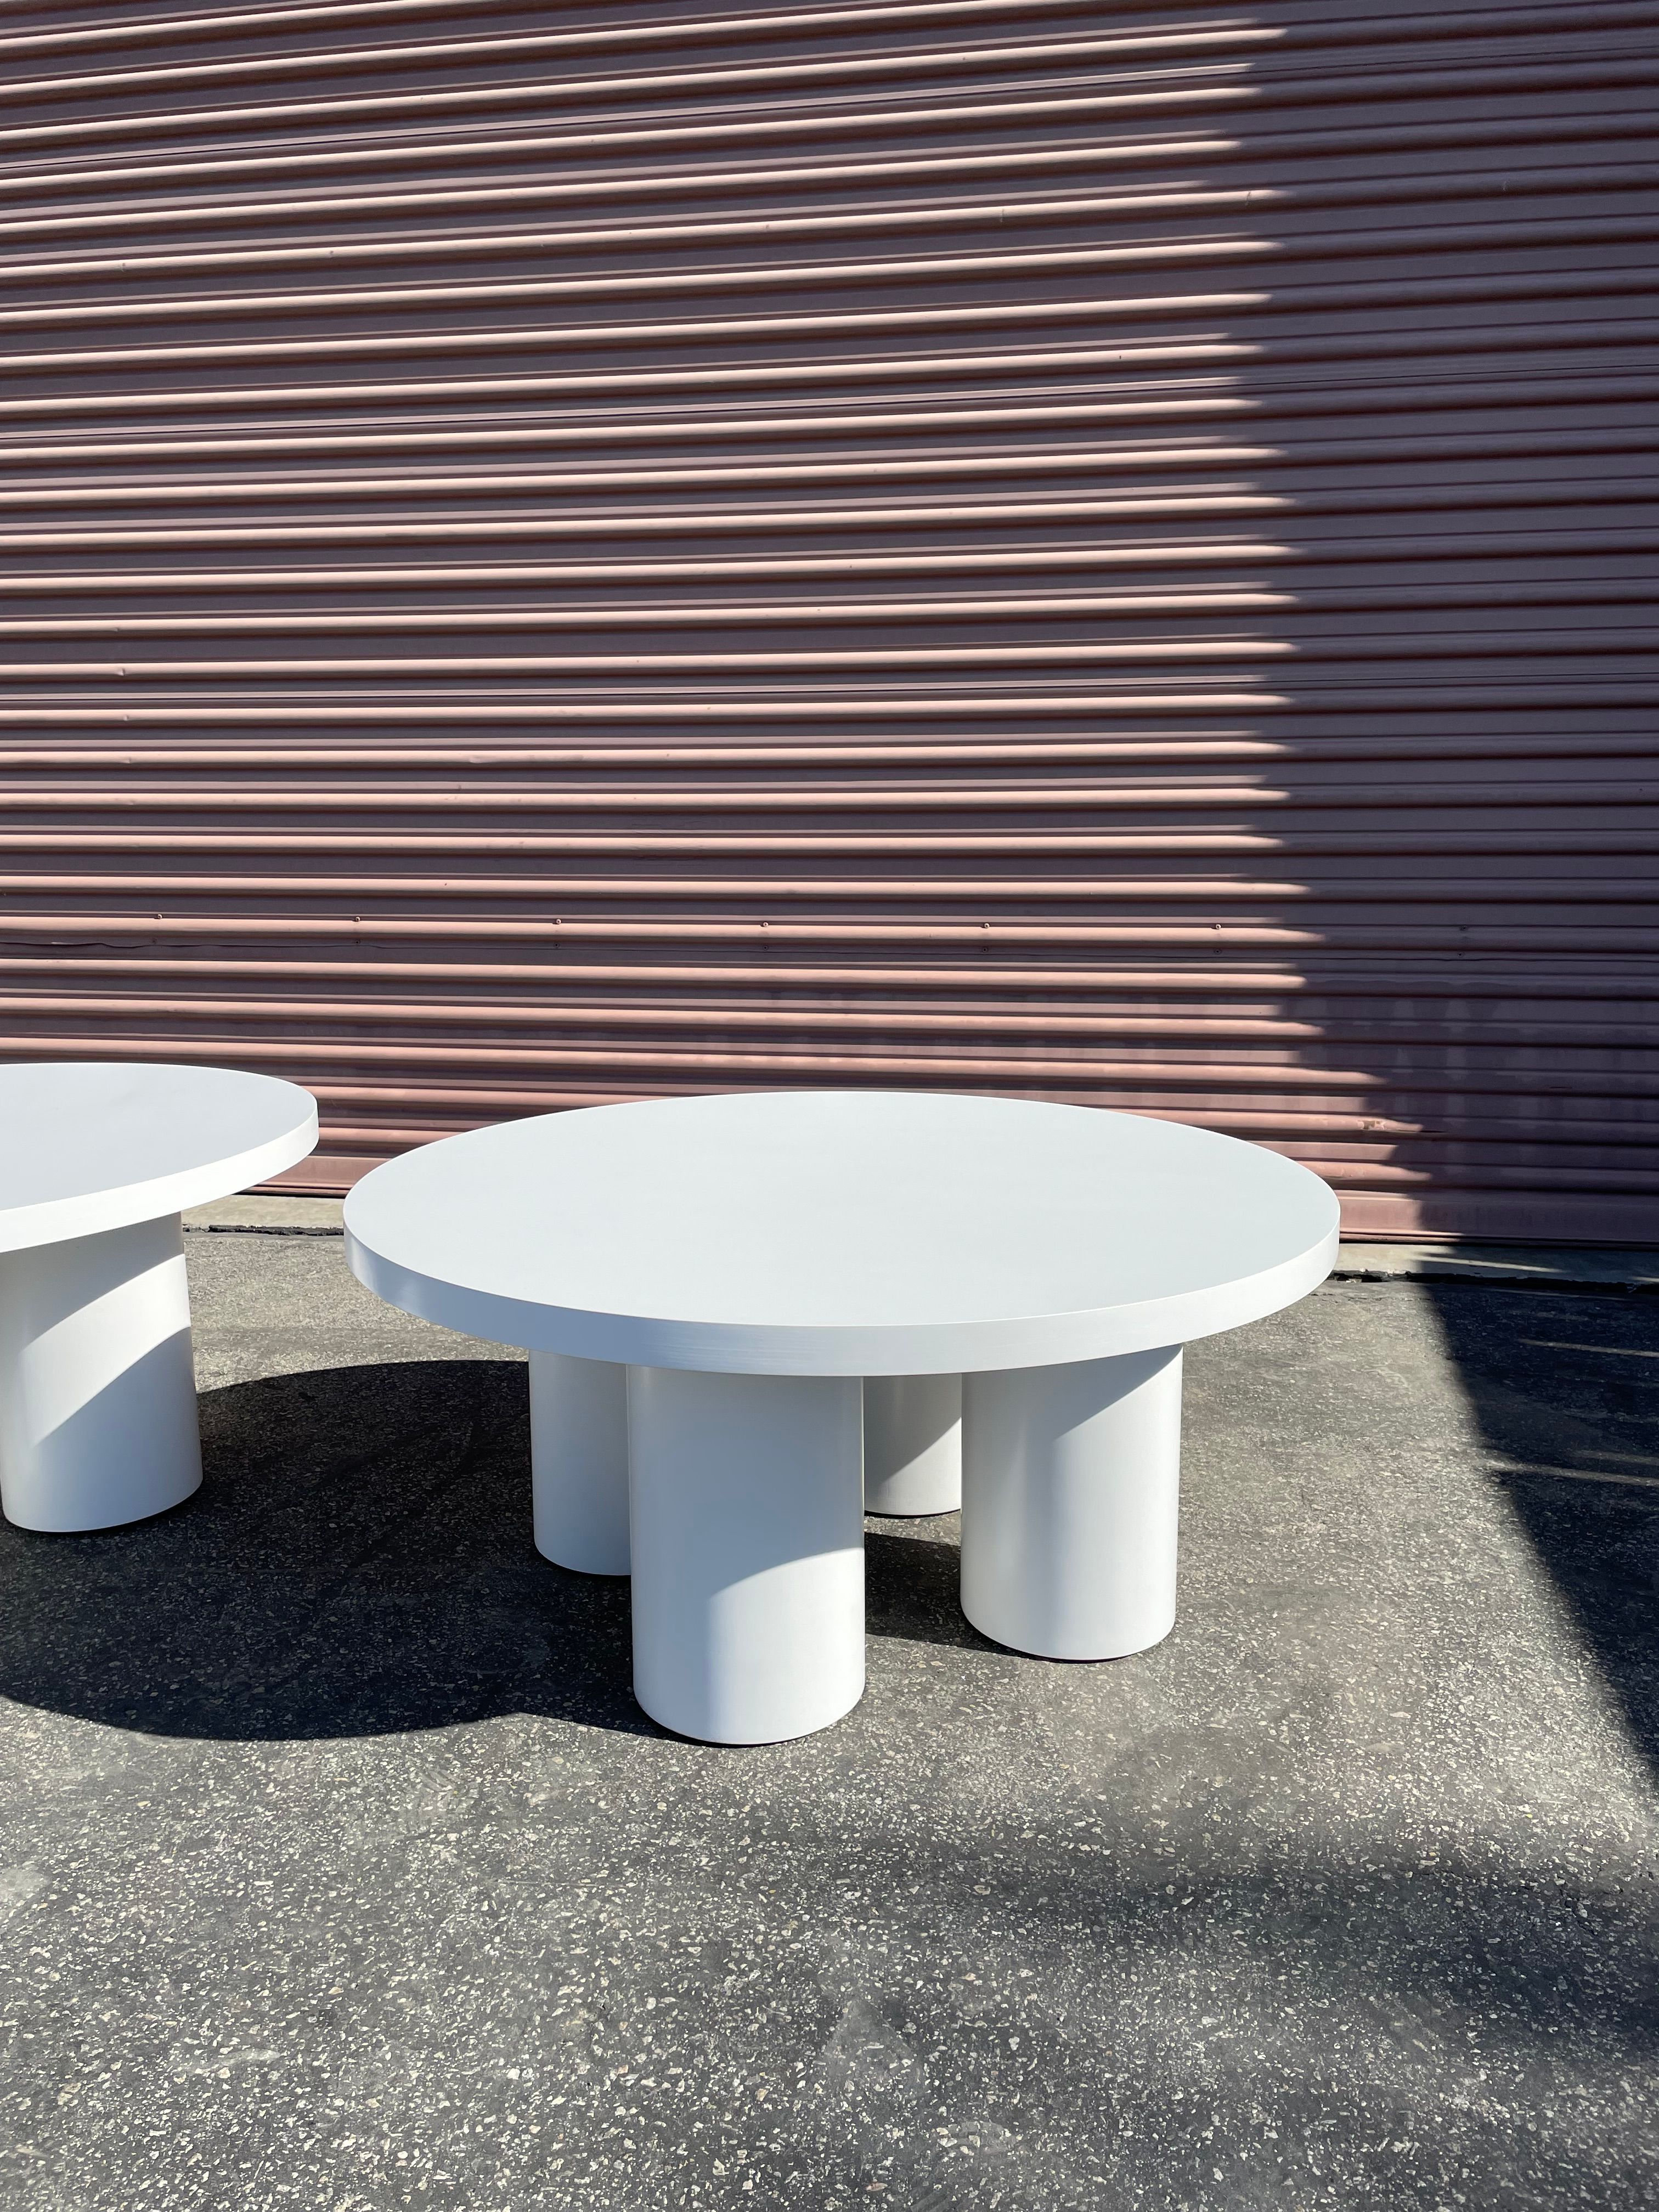  White Twin Coffee table Set - Folklor LA product image 1